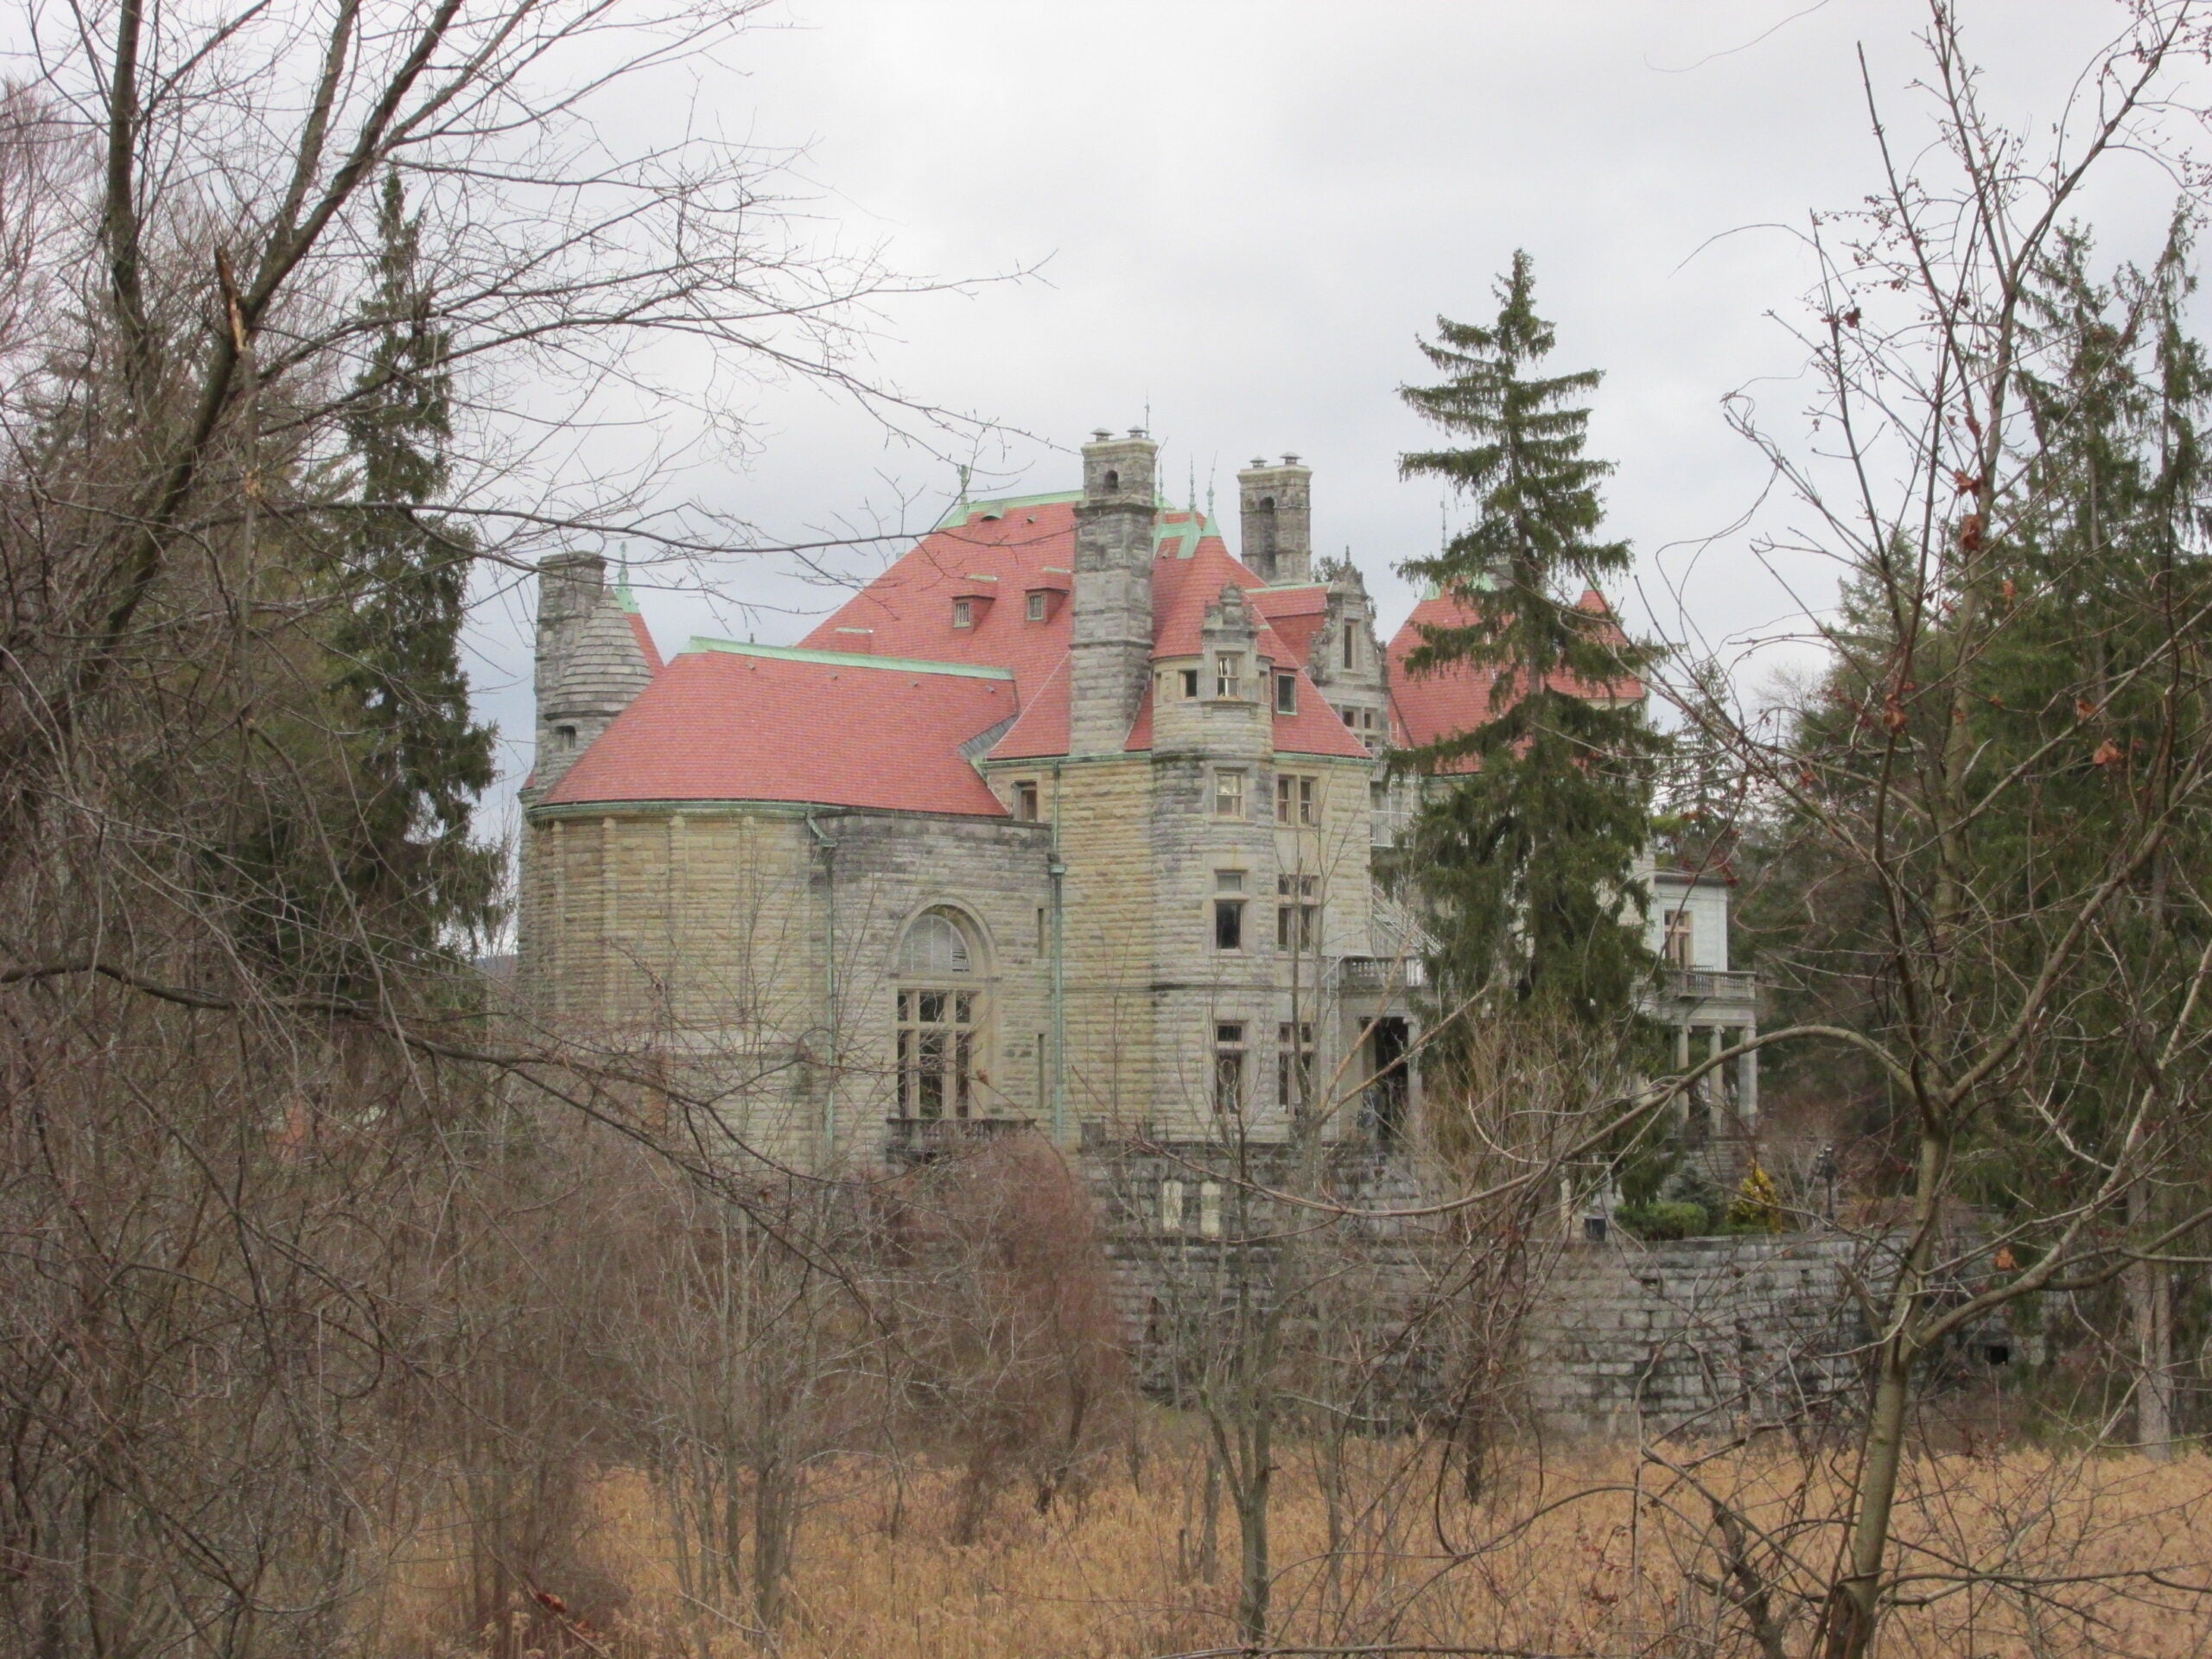 Searles Castle (Great Barrington): Edward Francis Searles, an interior decorator, met Mary Hopkins, whose late husband had been part owner of the Southern Pacific Railroad and left her with millions of dollars, according to the castle’s website. Hopkins had Searles work on her home in Massachusetts, which at the time was called Kellogg Terrace, and they were later married. The once private home is now the John Dewey Academy. (Correction: The above castle is located in Great Barrington, not Windham, New Hampshire as indicated in a previous version of this article. The Searles’ owned a different castle in Windham.)